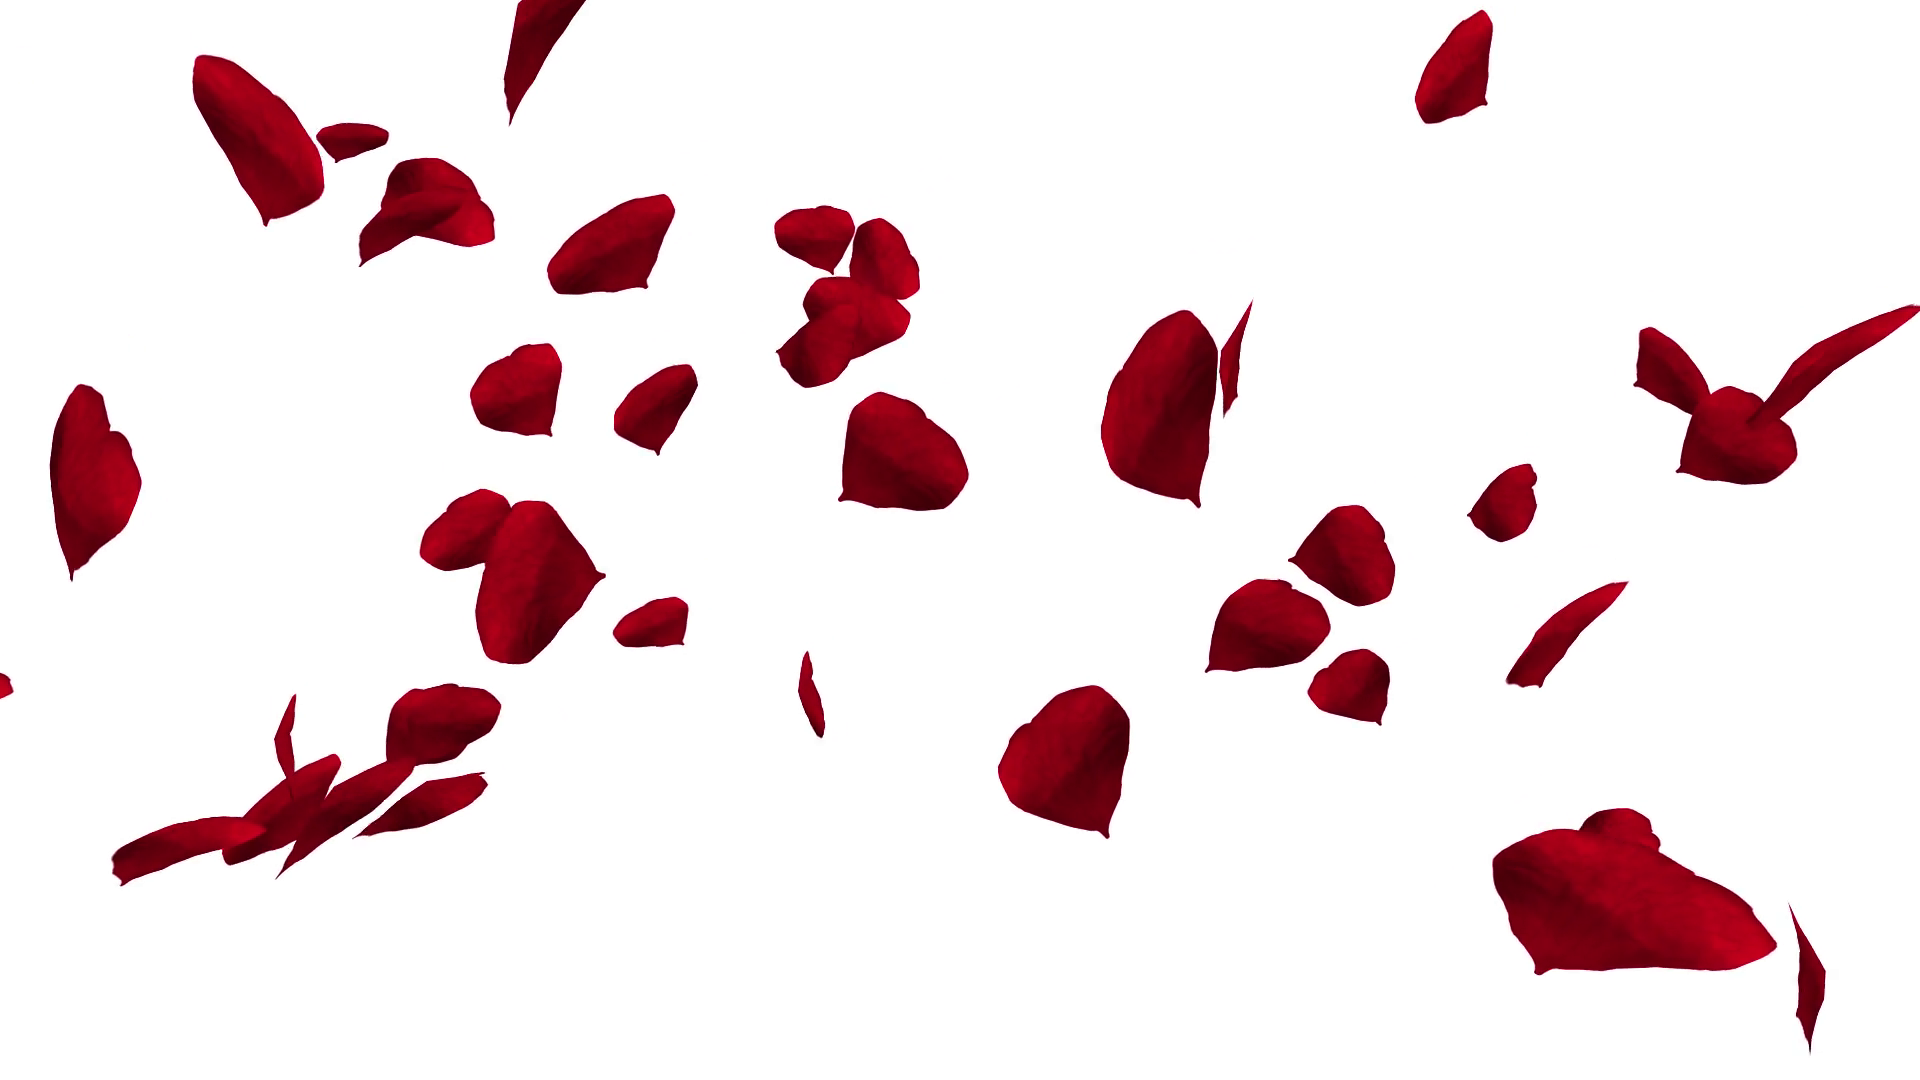 Falling and swirling red rose petals over white background ...